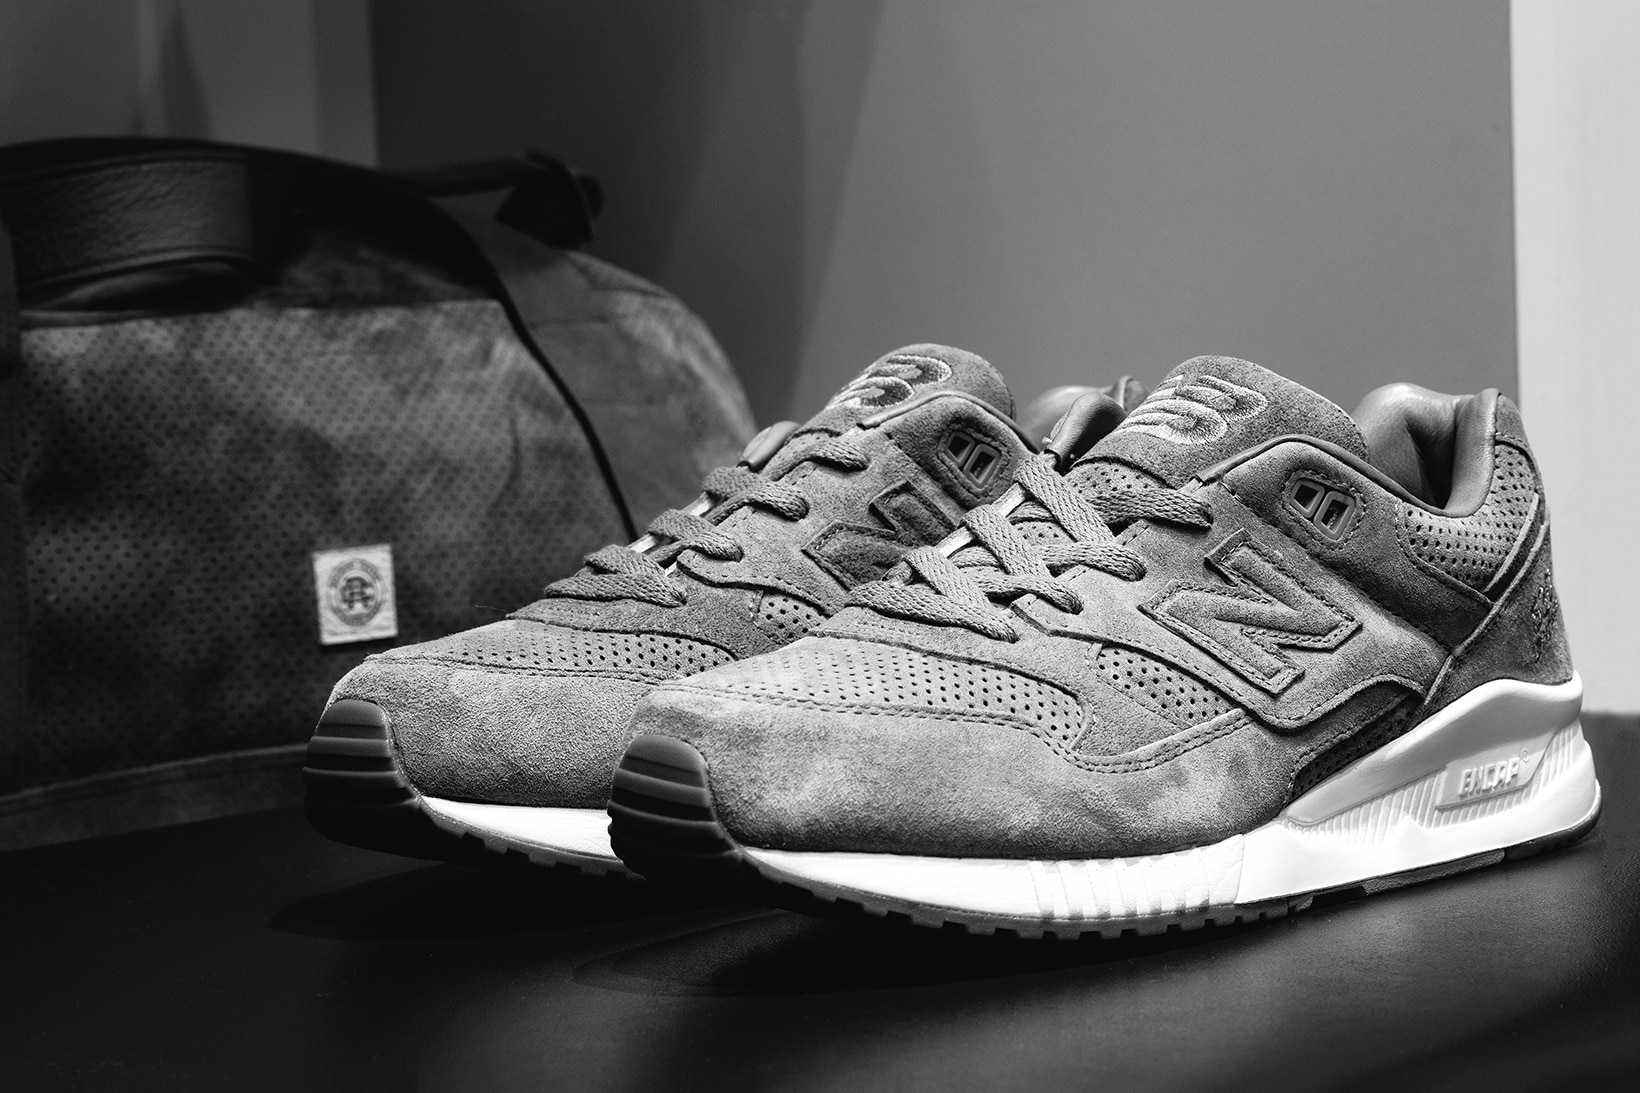 REIGNING CHAMP X NEW BALANCE 530-GYM PACK-3